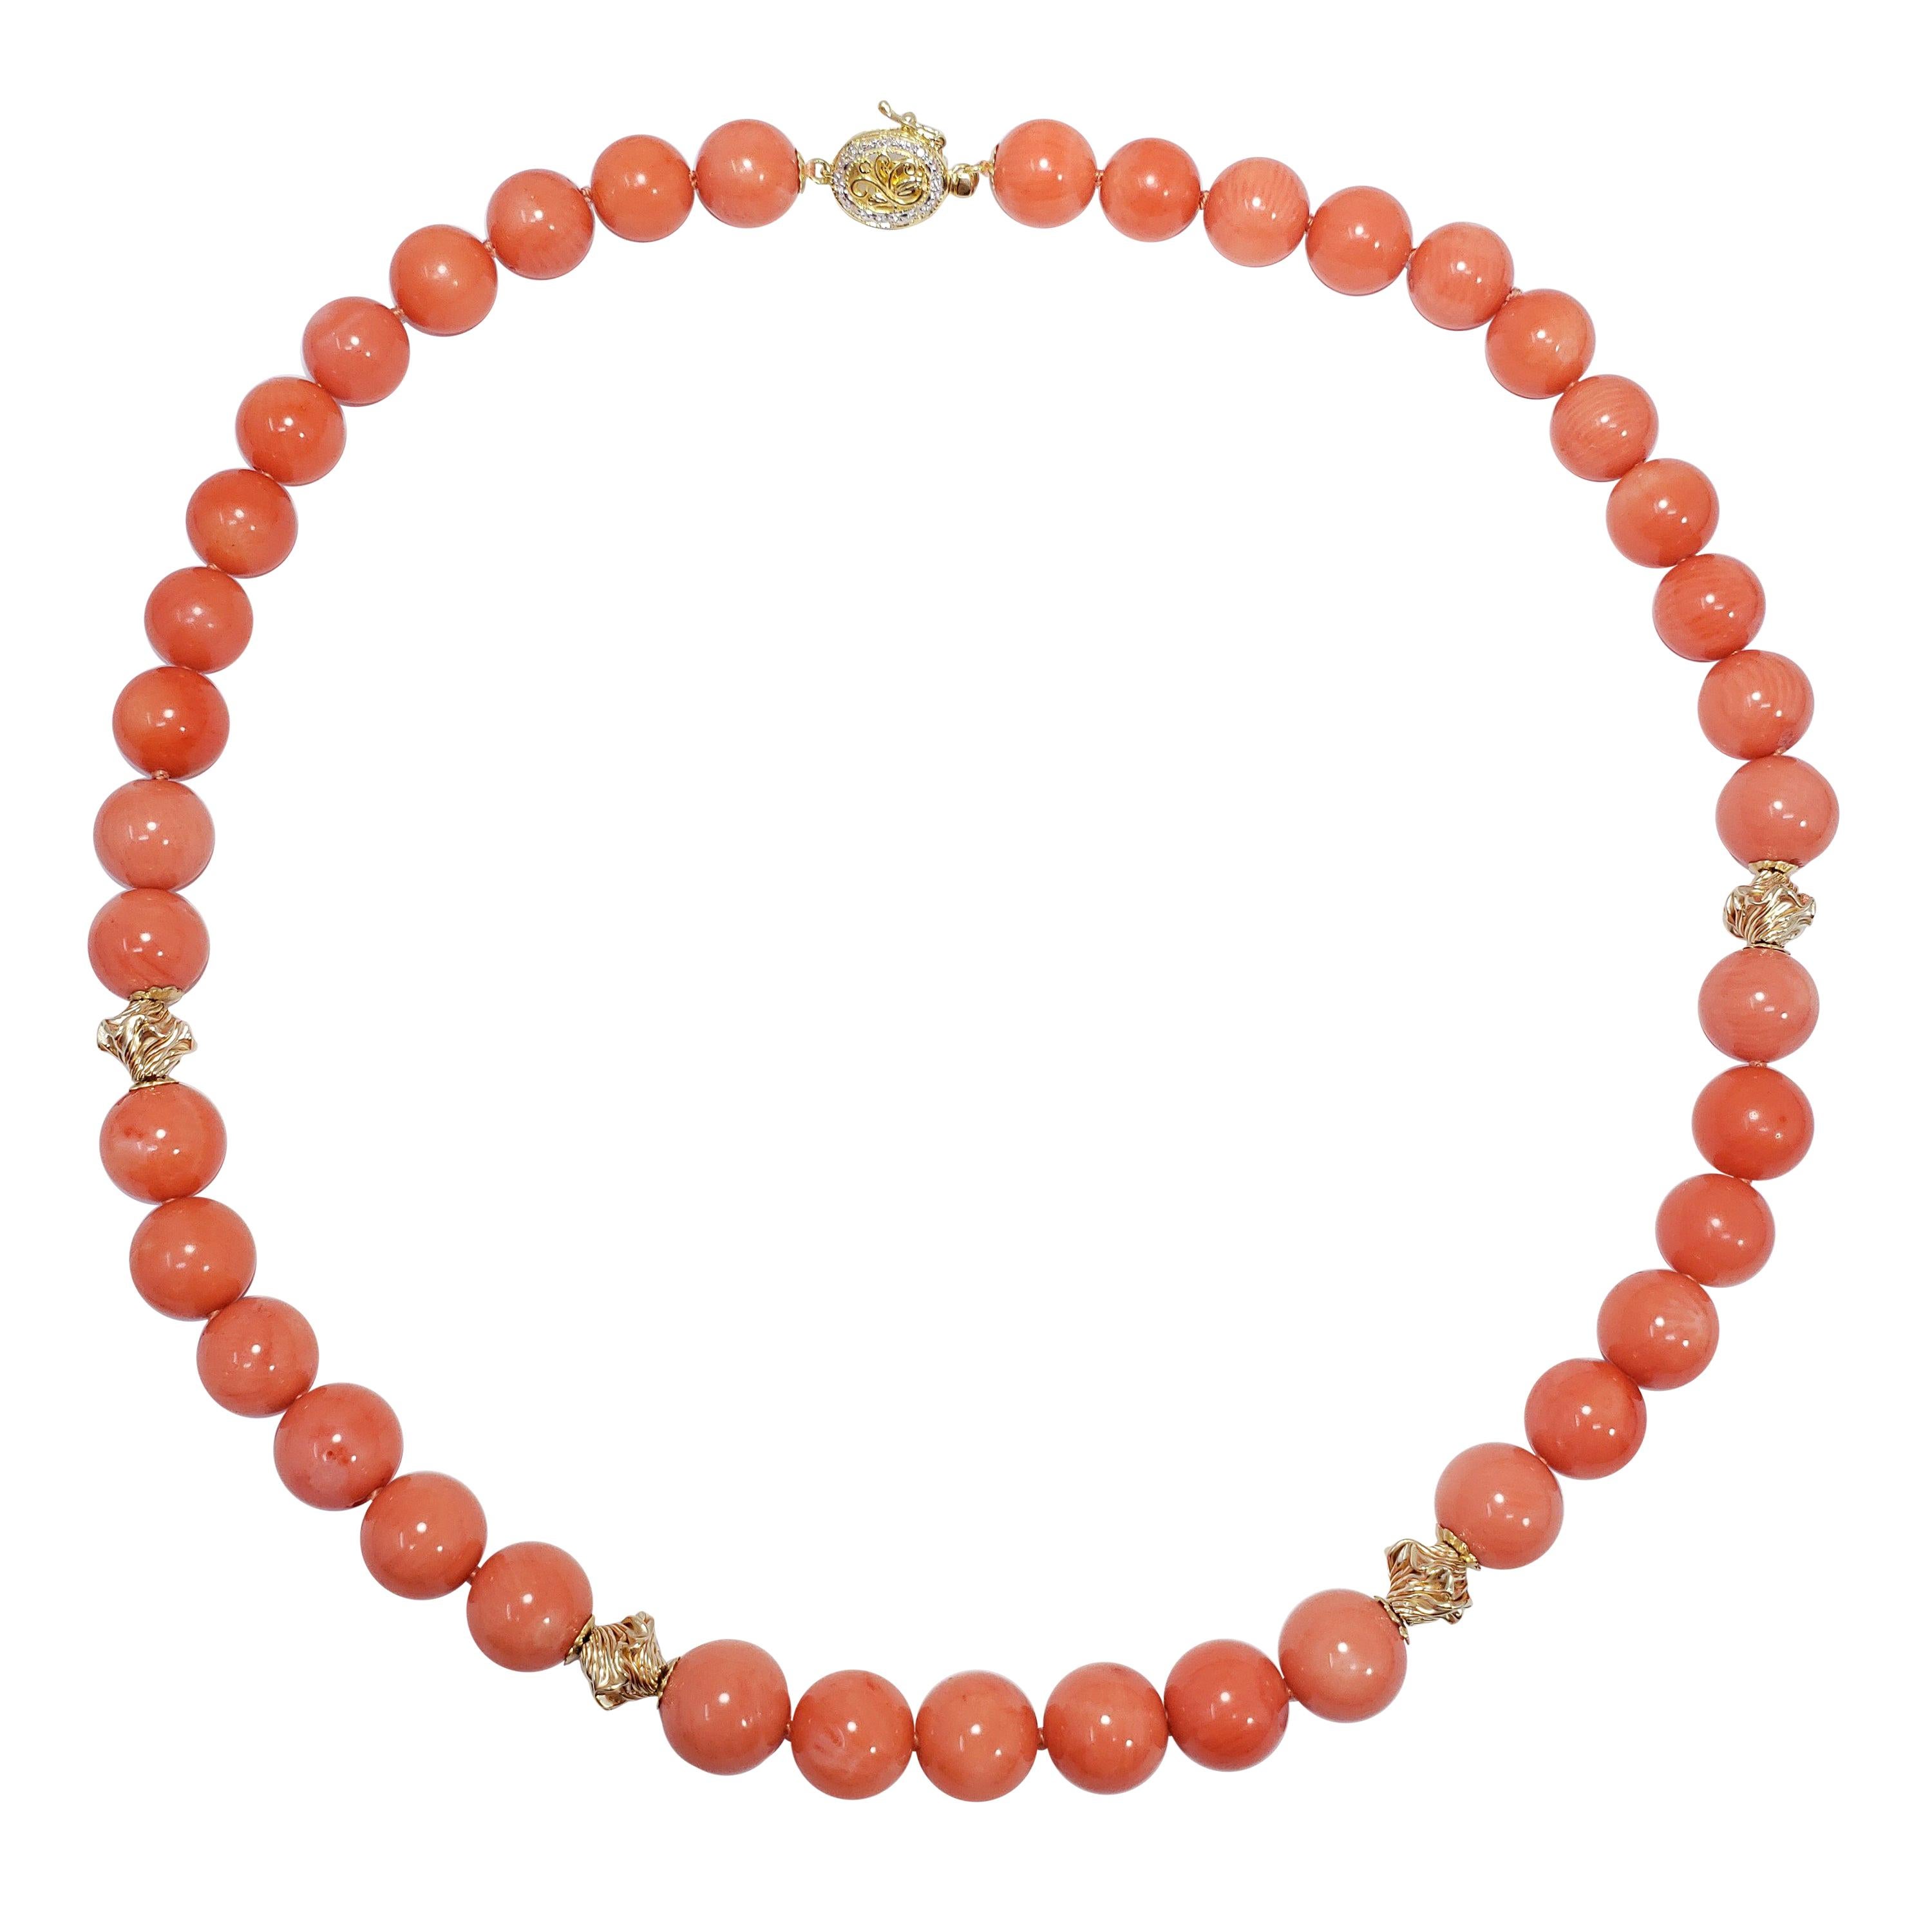 Gold and Diamond Accented Salmon Coral Bead Knotted String Necklace, 14 Karat For Sale